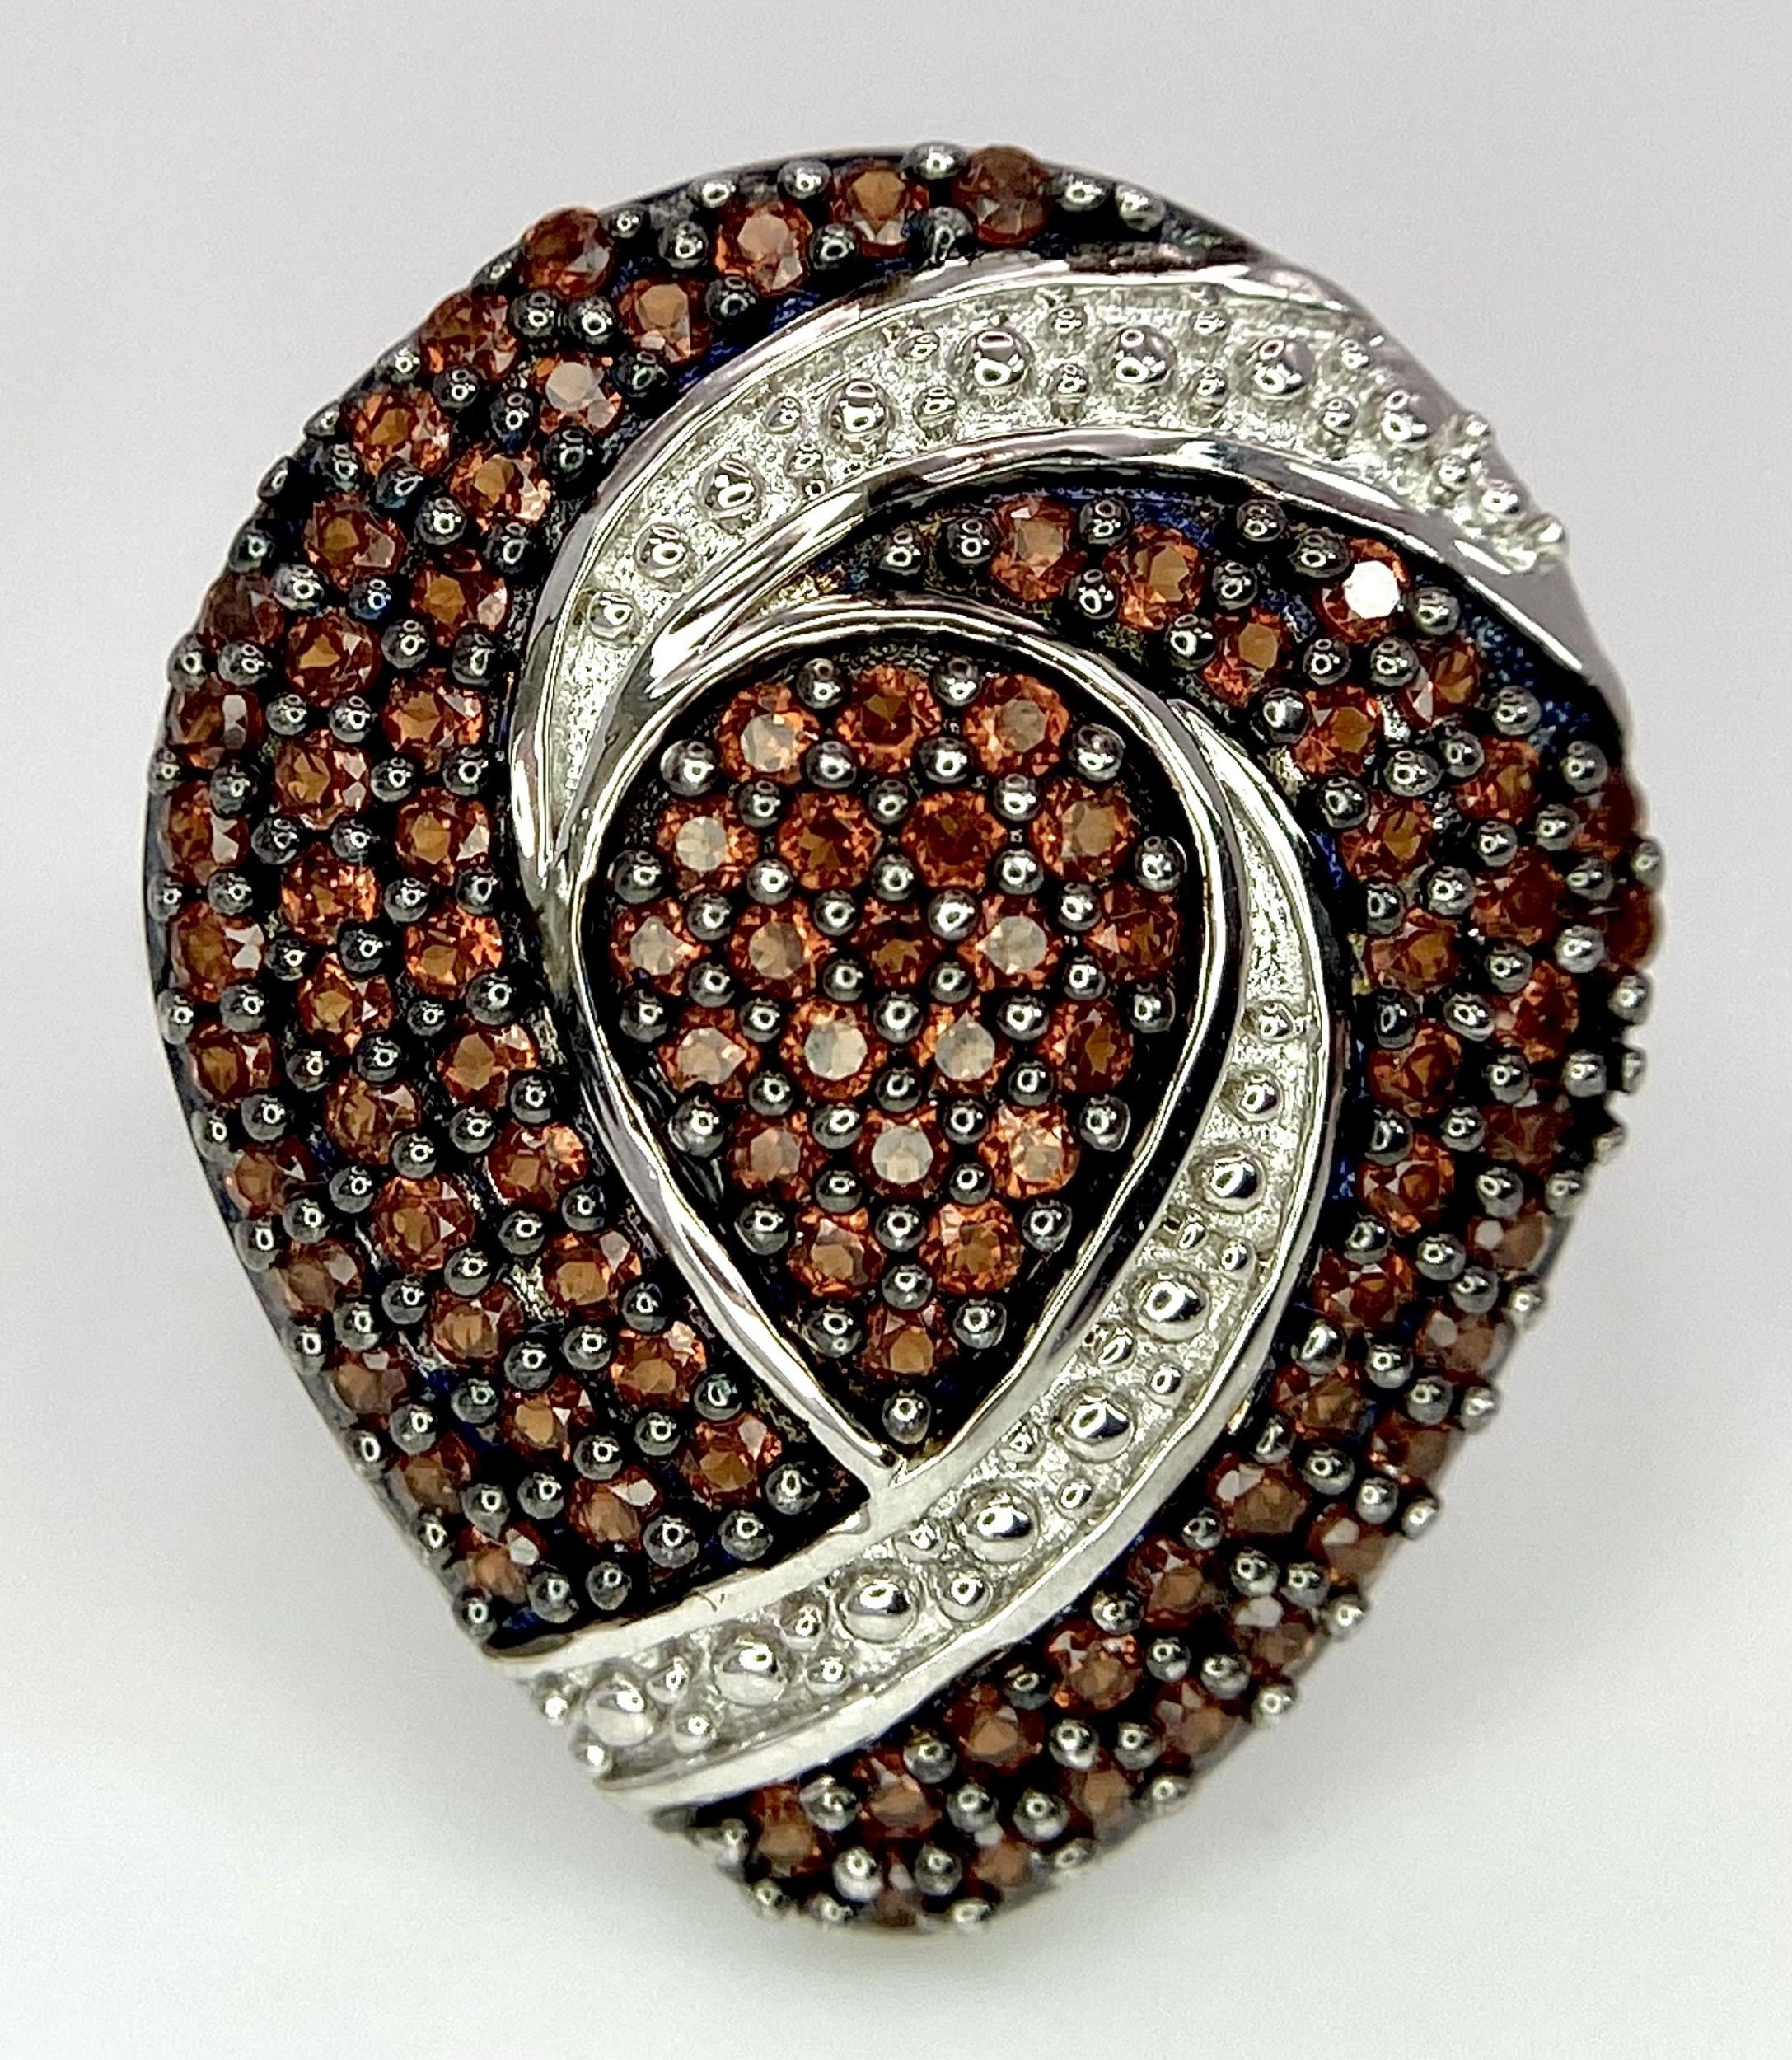 A Stunning, Unworn, Fully Certified Limited Edition (1 of 50), Sterling Silver and Anthill Garnet - Image 4 of 7